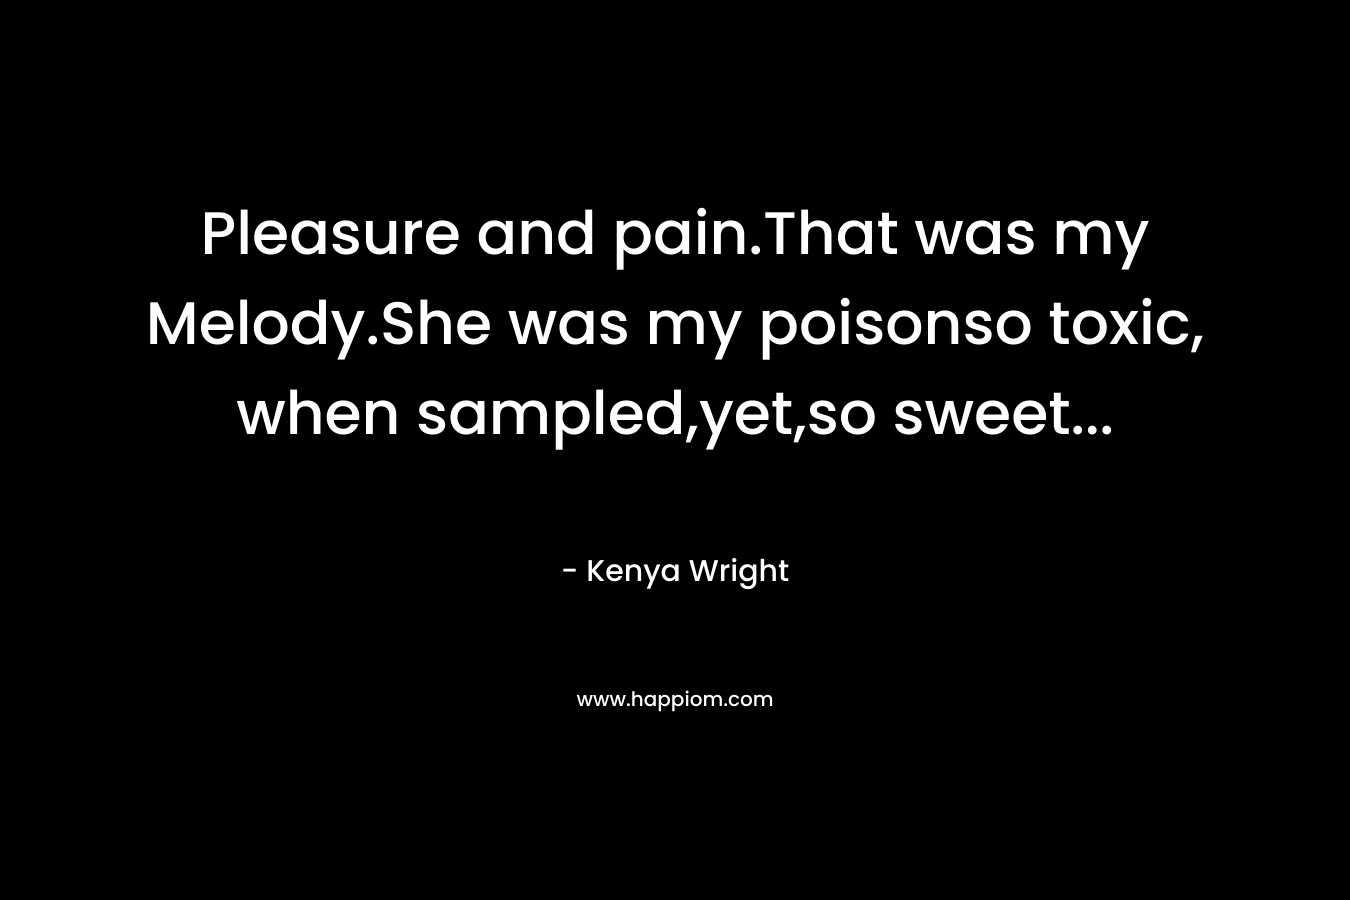 Pleasure and pain.That was my Melody.She was my poisonso toxic, when sampled,yet,so sweet...